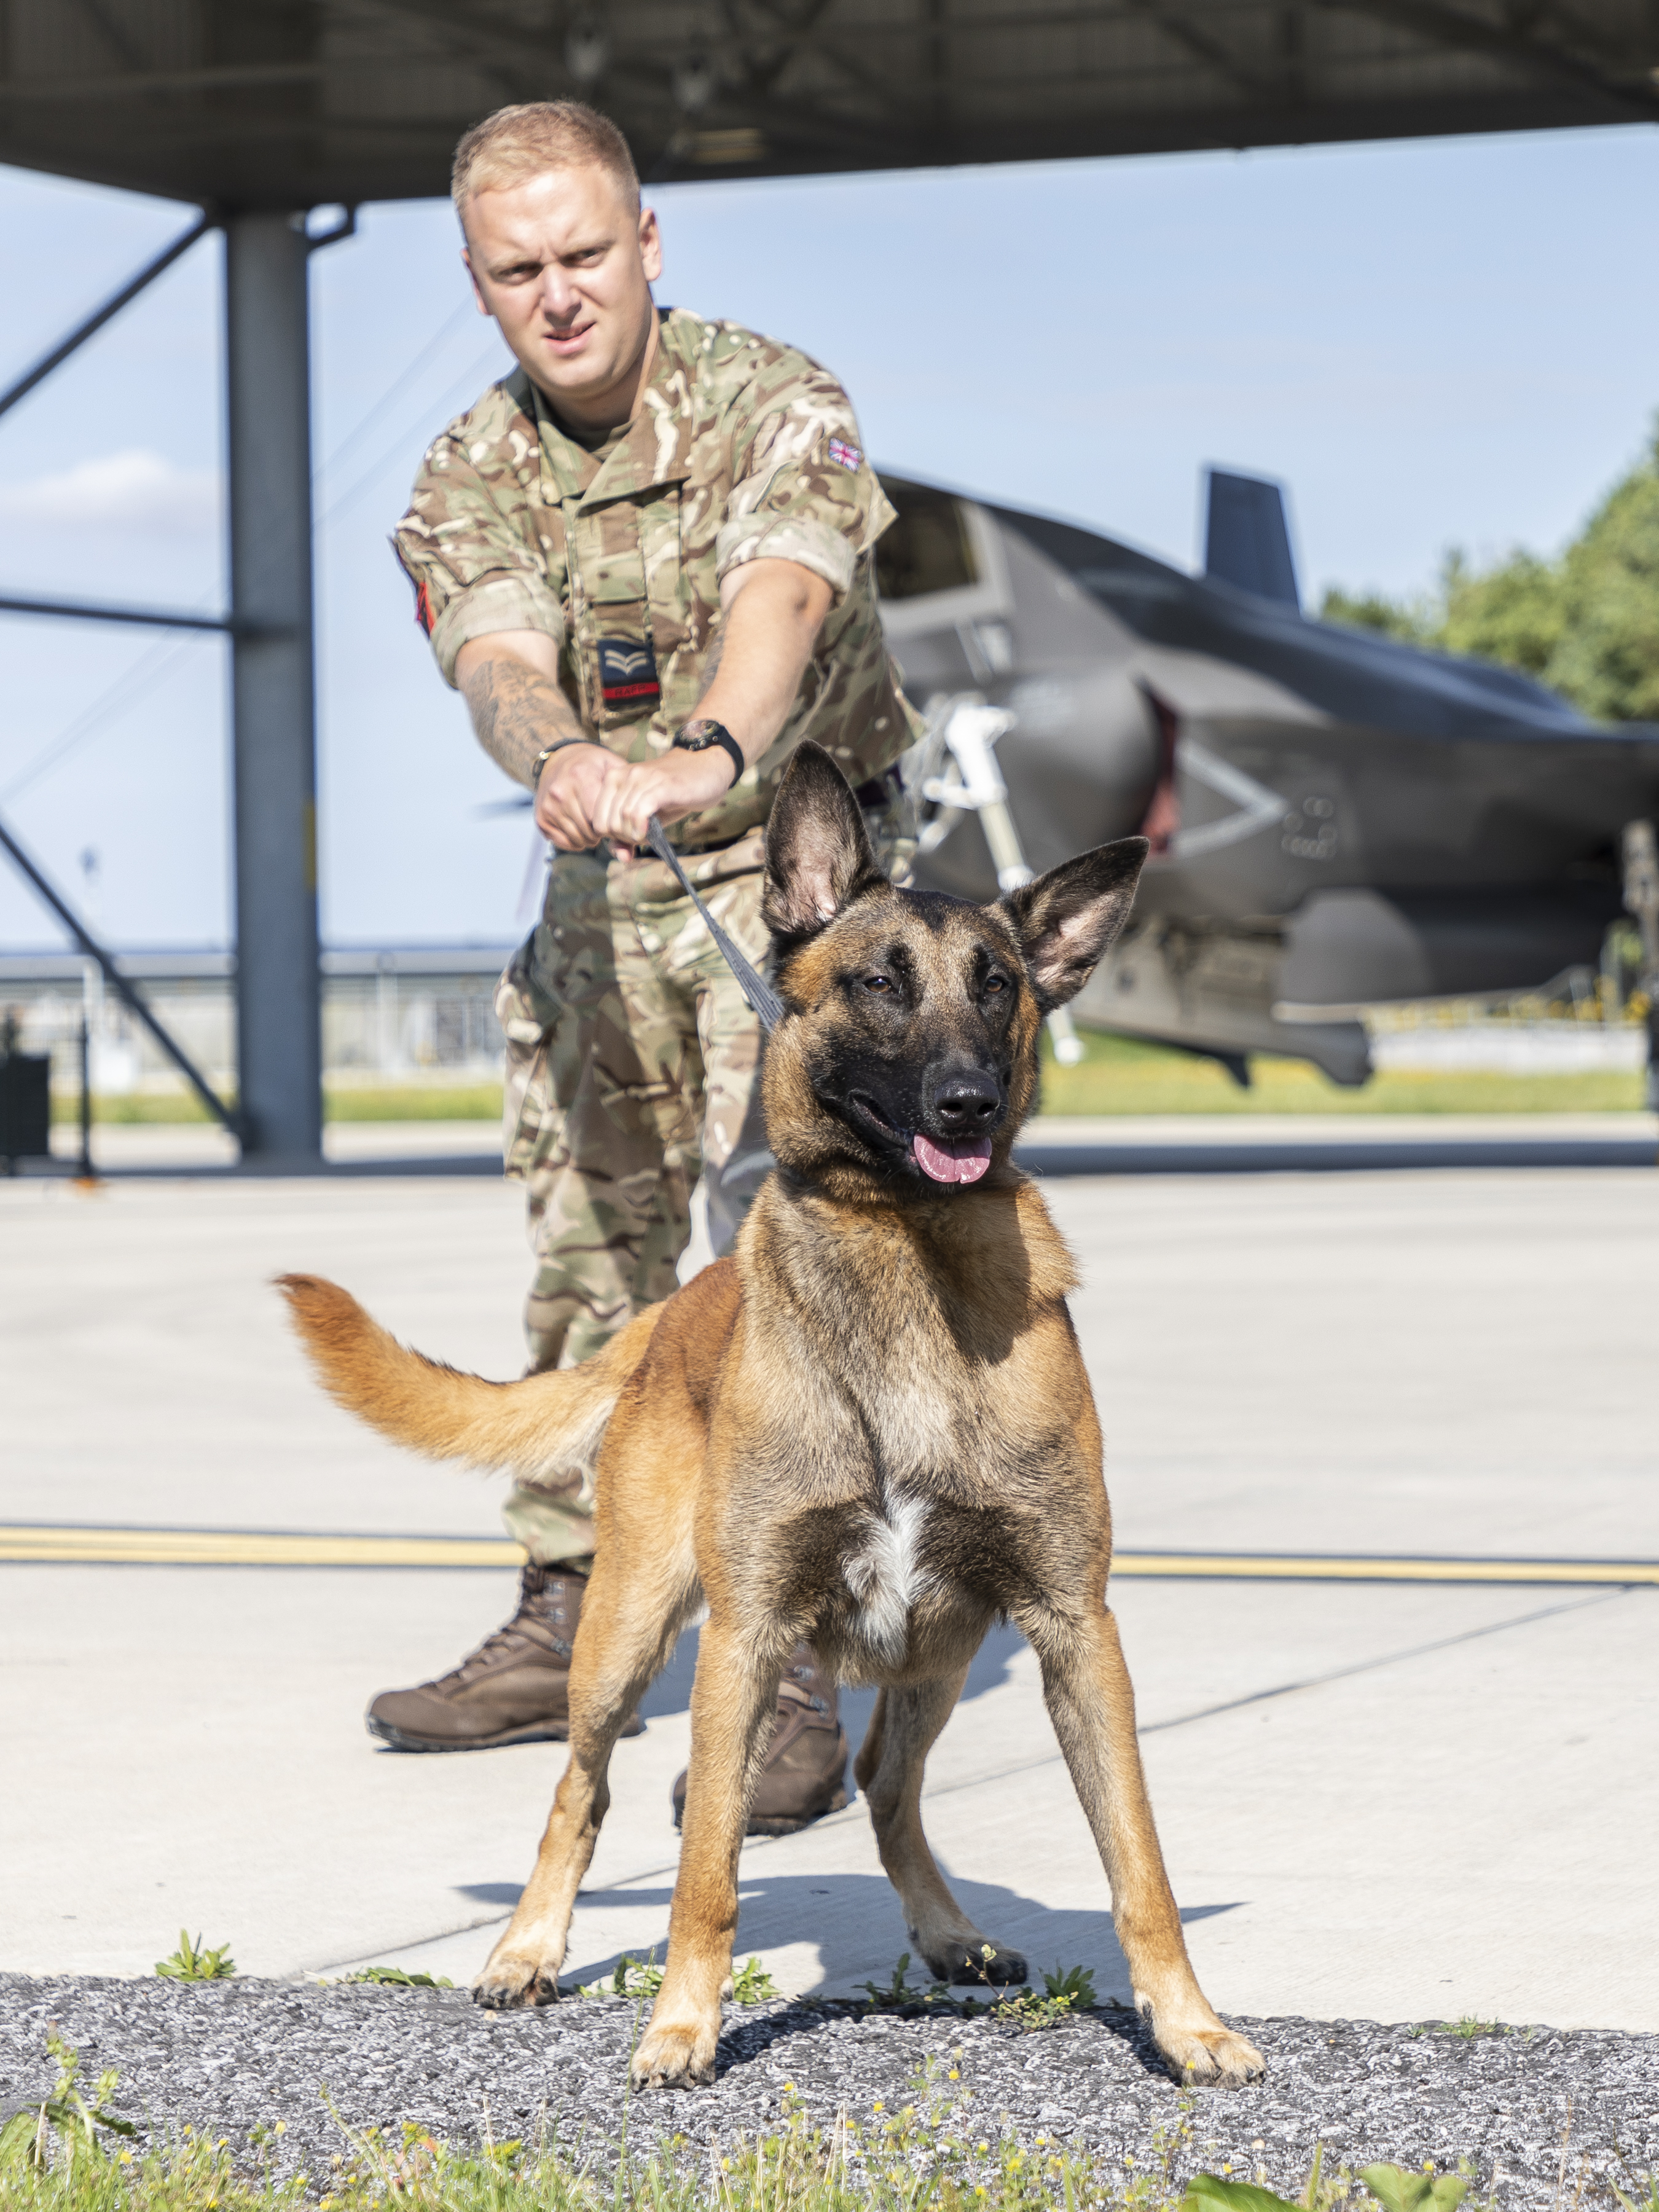 RAF Police Handler and dog with aircraft in background.